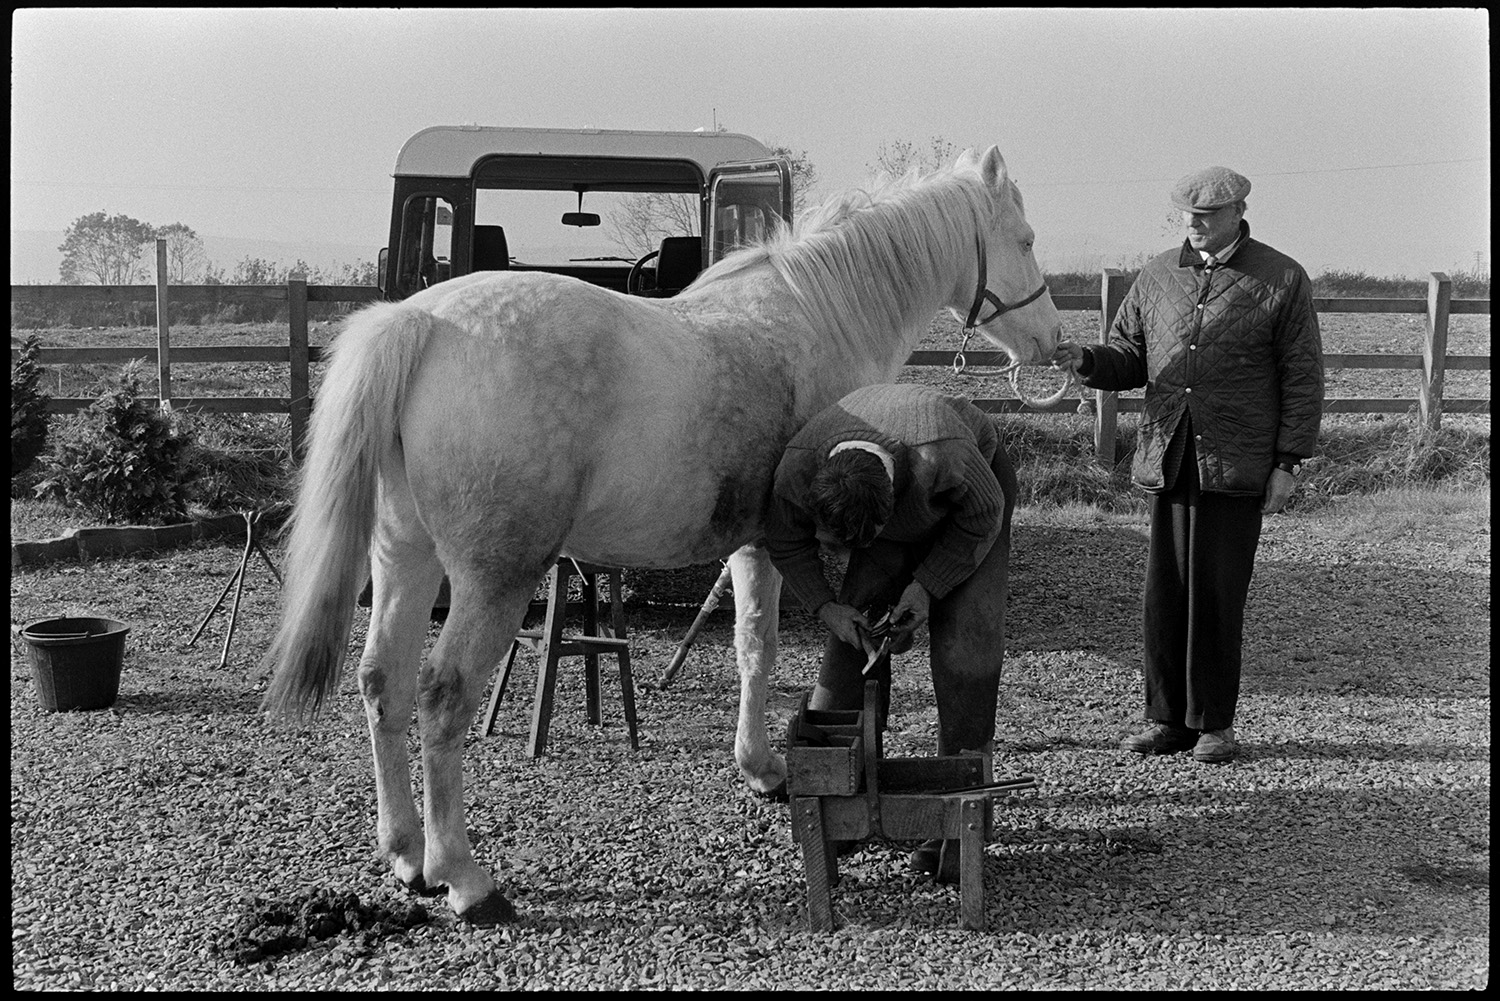 Blacksmith shoeing horse. 
[A blacksmith shoeing a horse on a gravel area outside the Beaford Centre at Greenwarren House, Beaford. Henry Bright is holding the reigns of the horse. A Land Rover is parked behind them.]